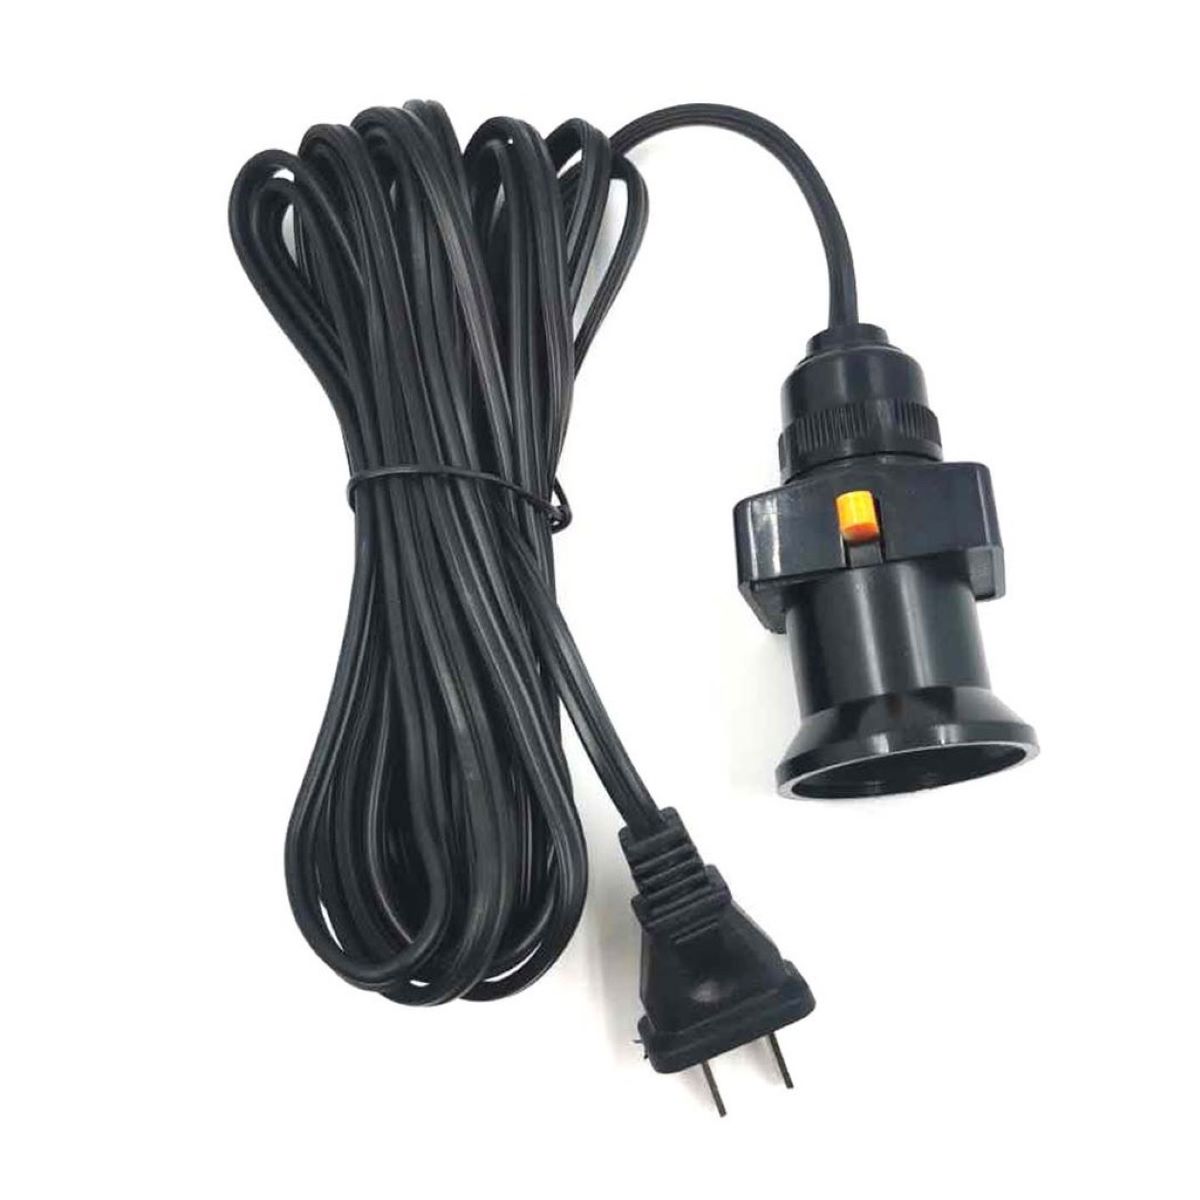 11 Amazing Light Socket Extension Cord for 2023